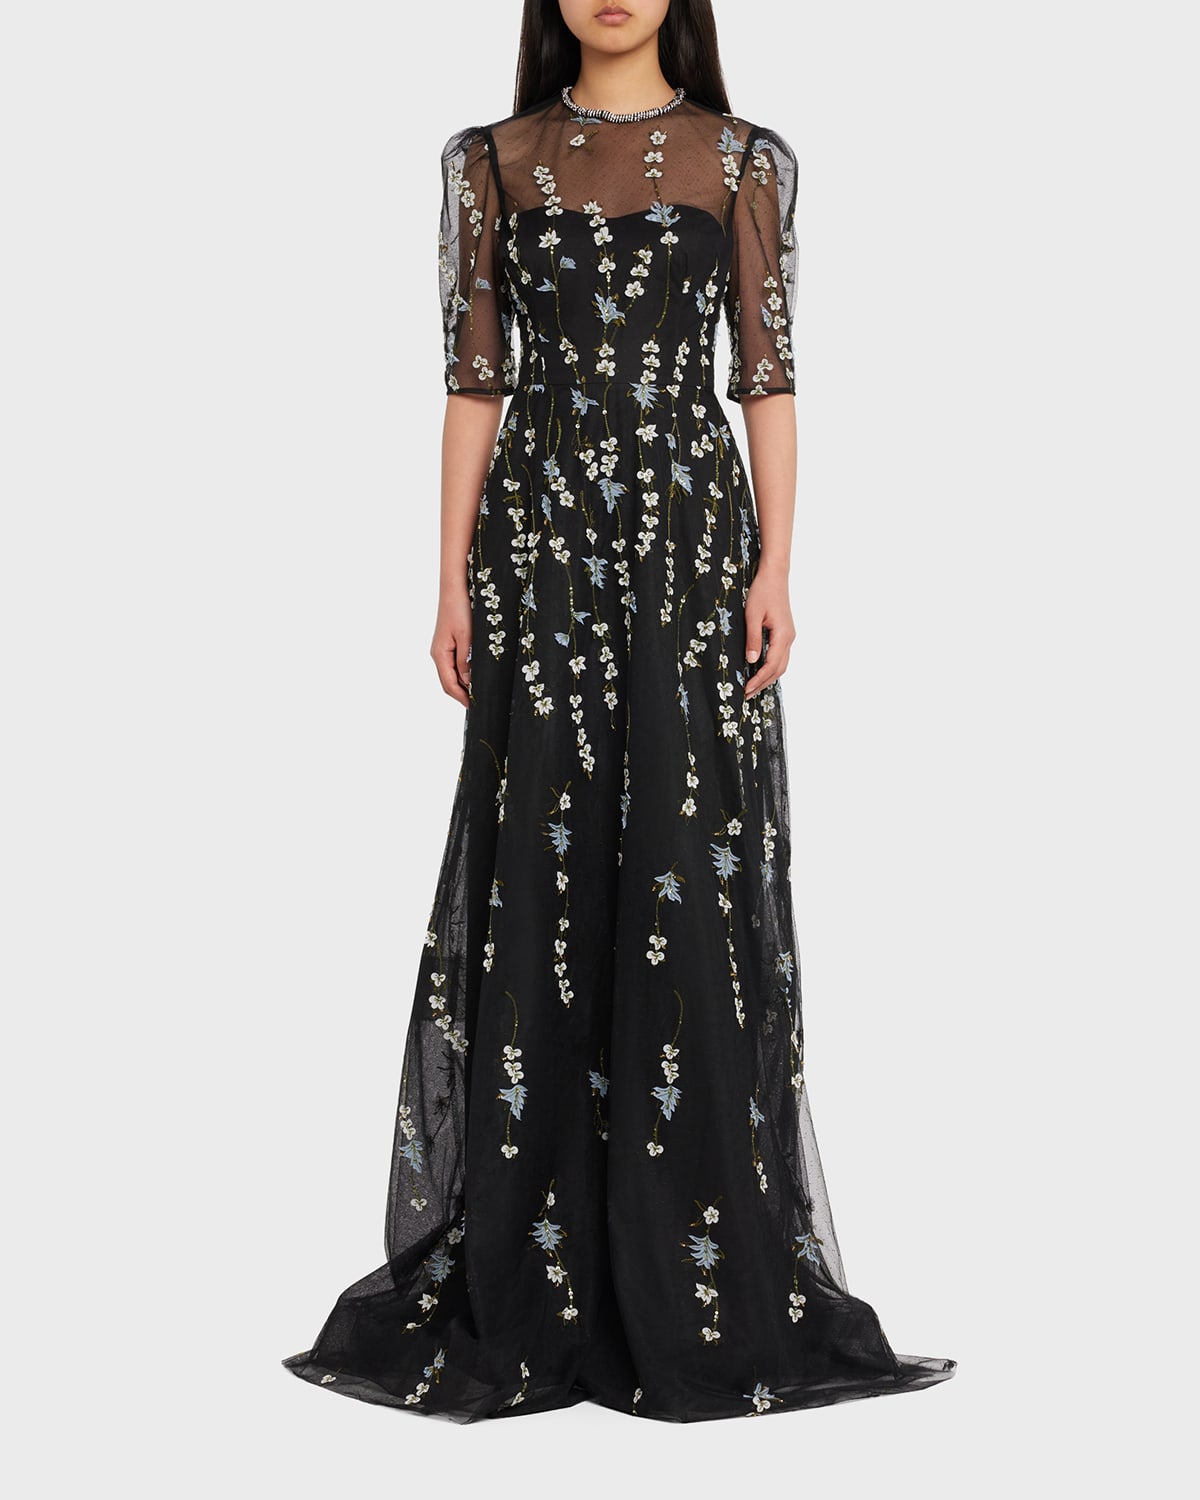 Rickie Freeman For Teri Jon Beaded Floral-appliqué Illusion A-line Gown In Black Mult